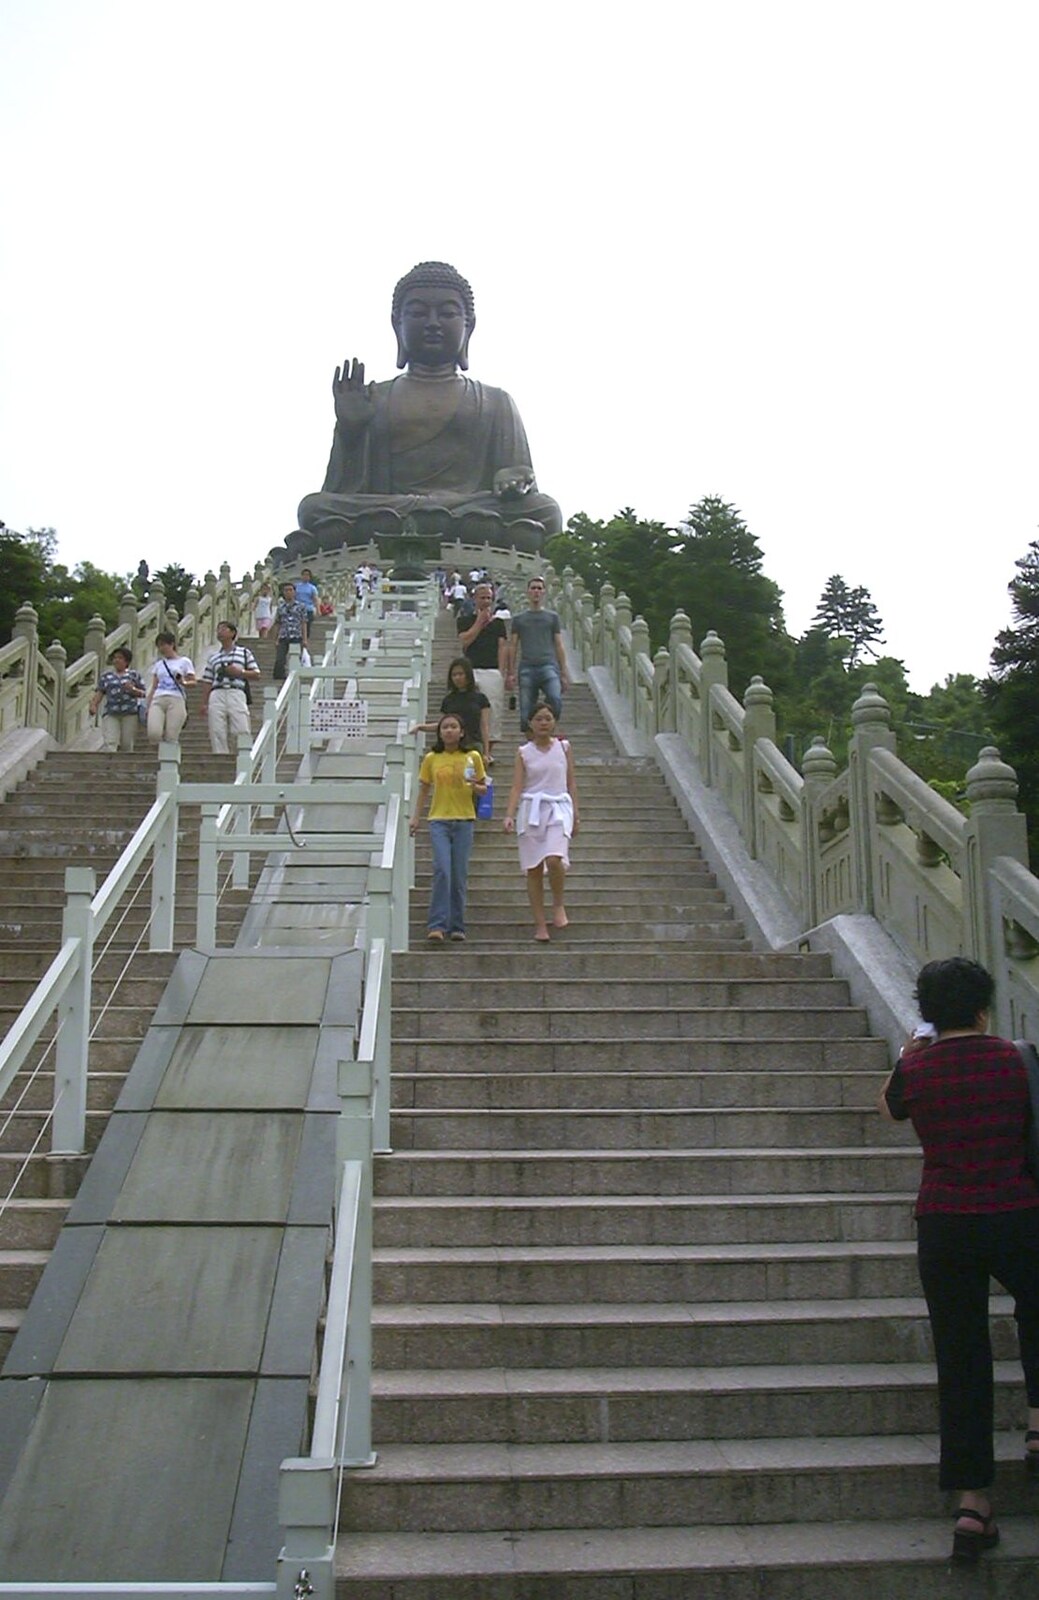 The many steps to Buddha from Lantau Island and the Po Lin Monastery, Hong Kong, China - 14th August 2001